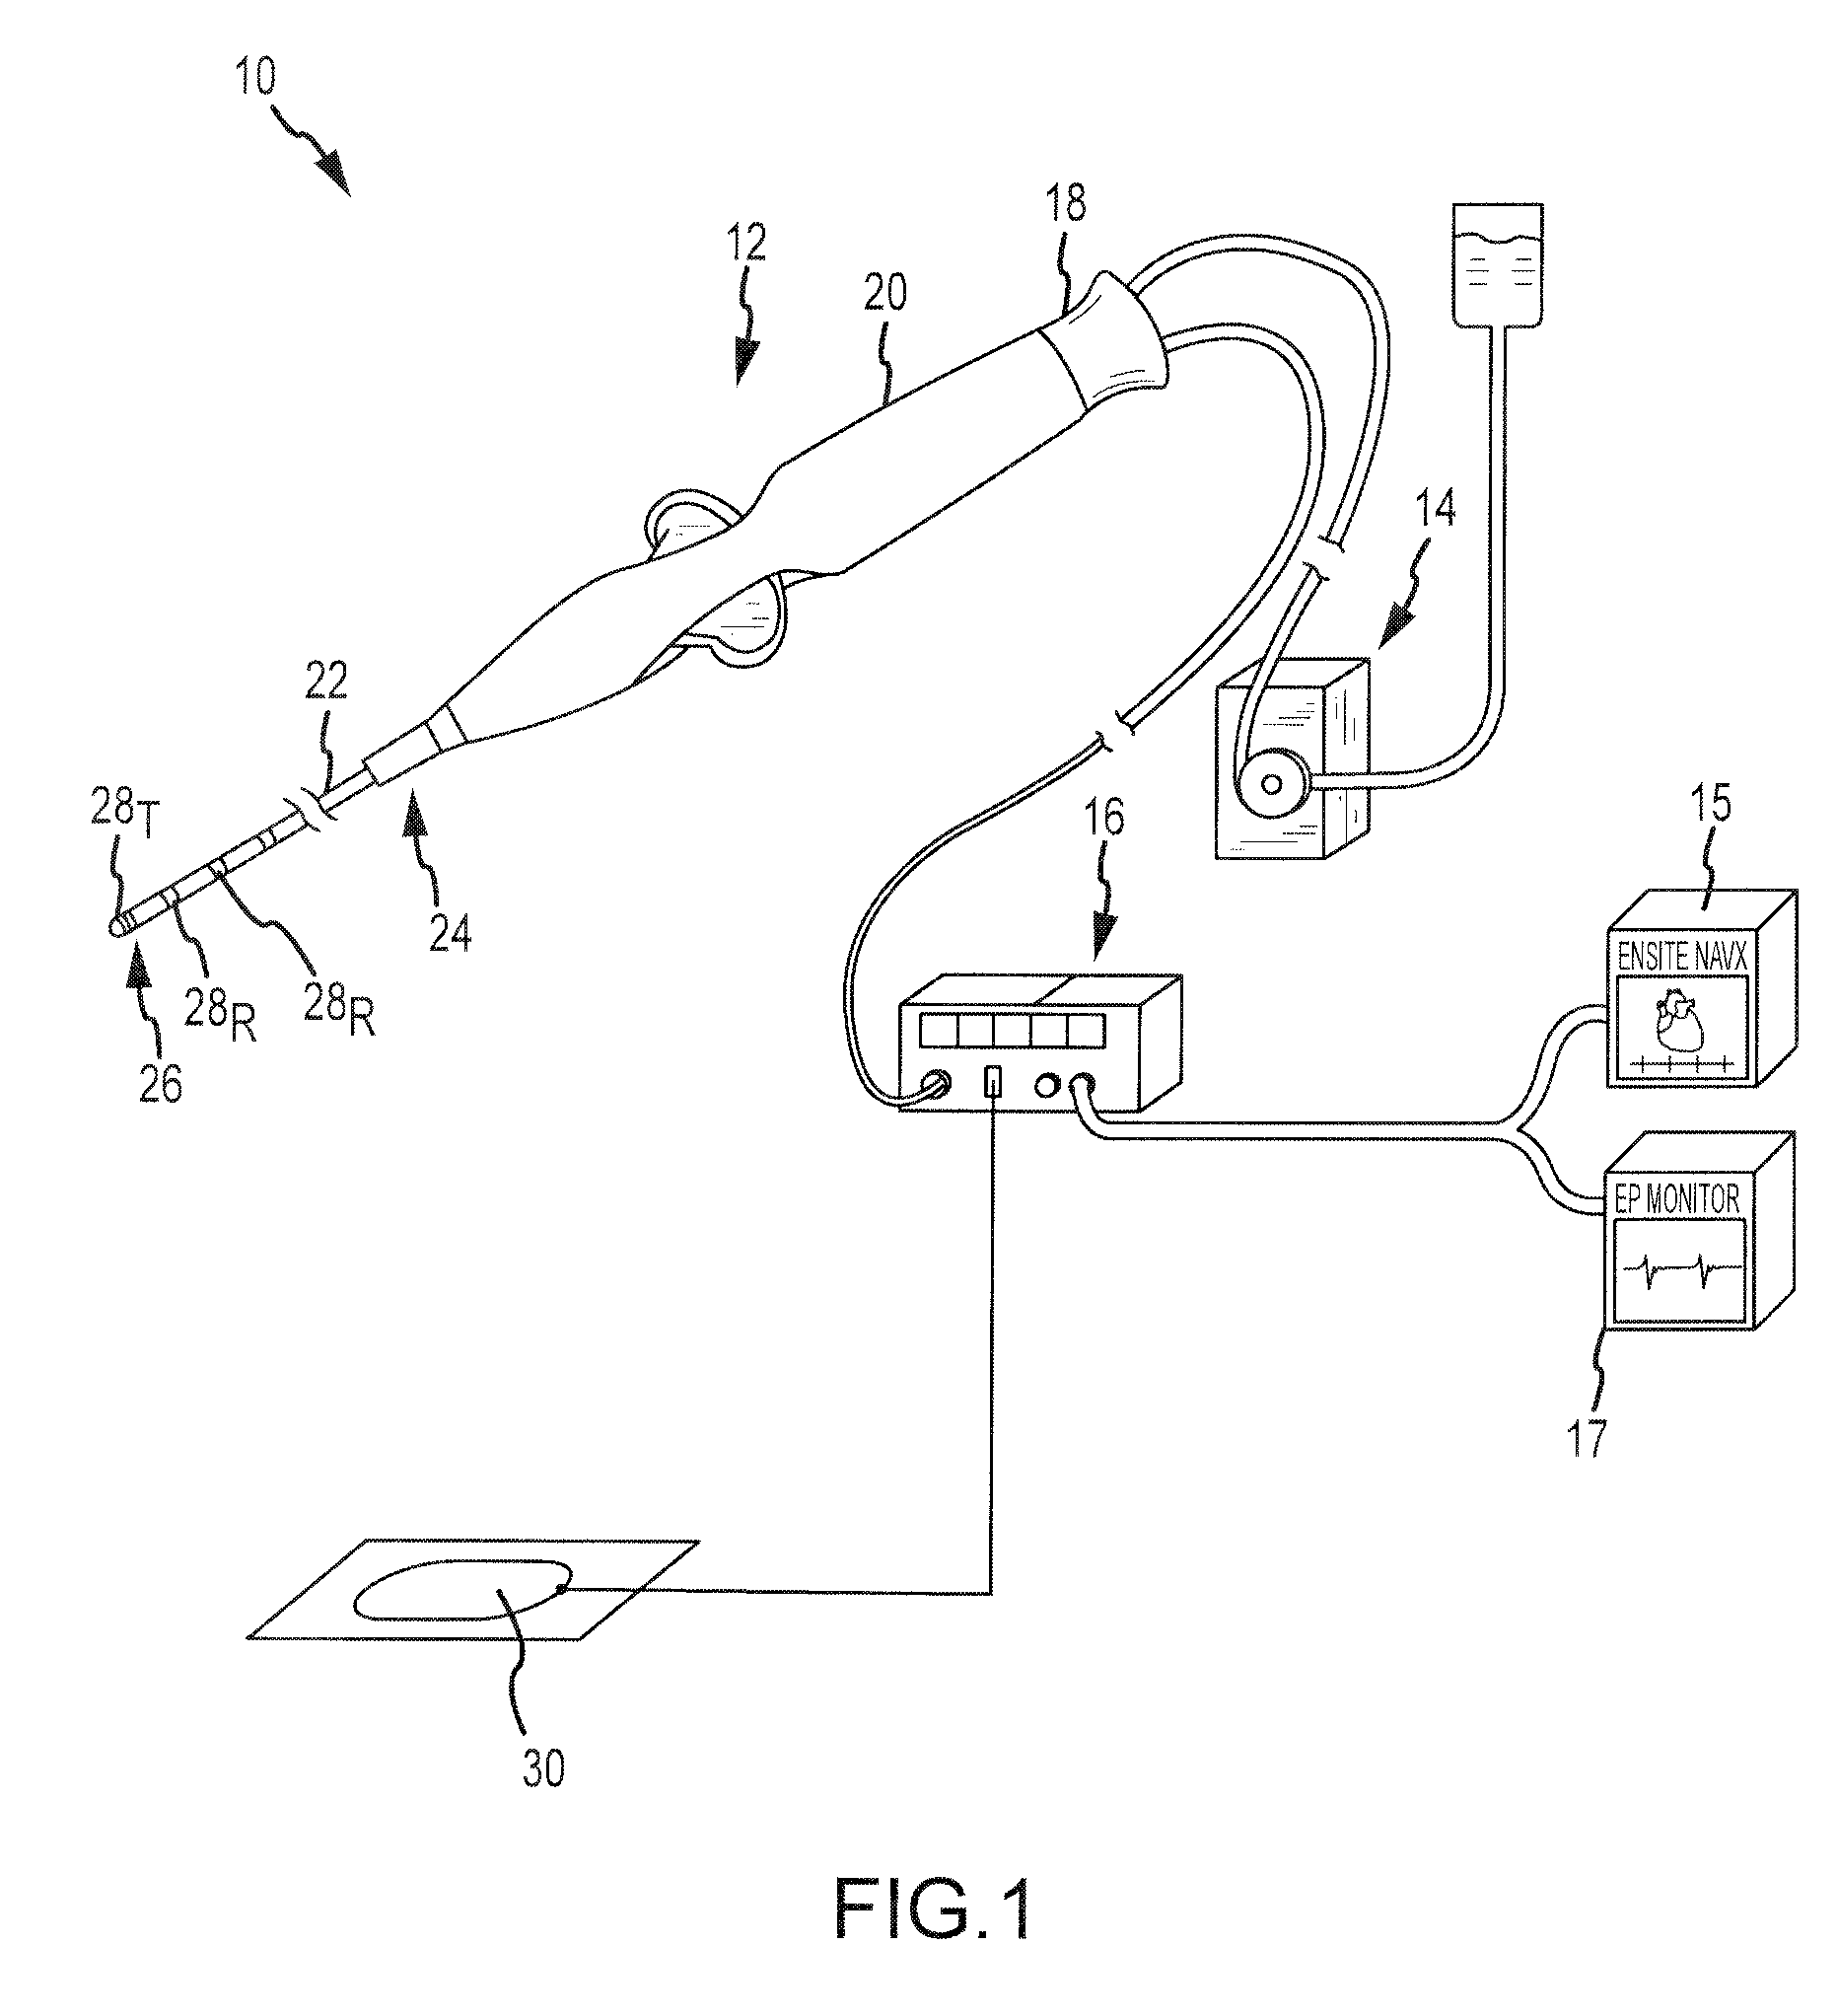 Irrigated ablation electrode assembly having off-center irrigation passageway